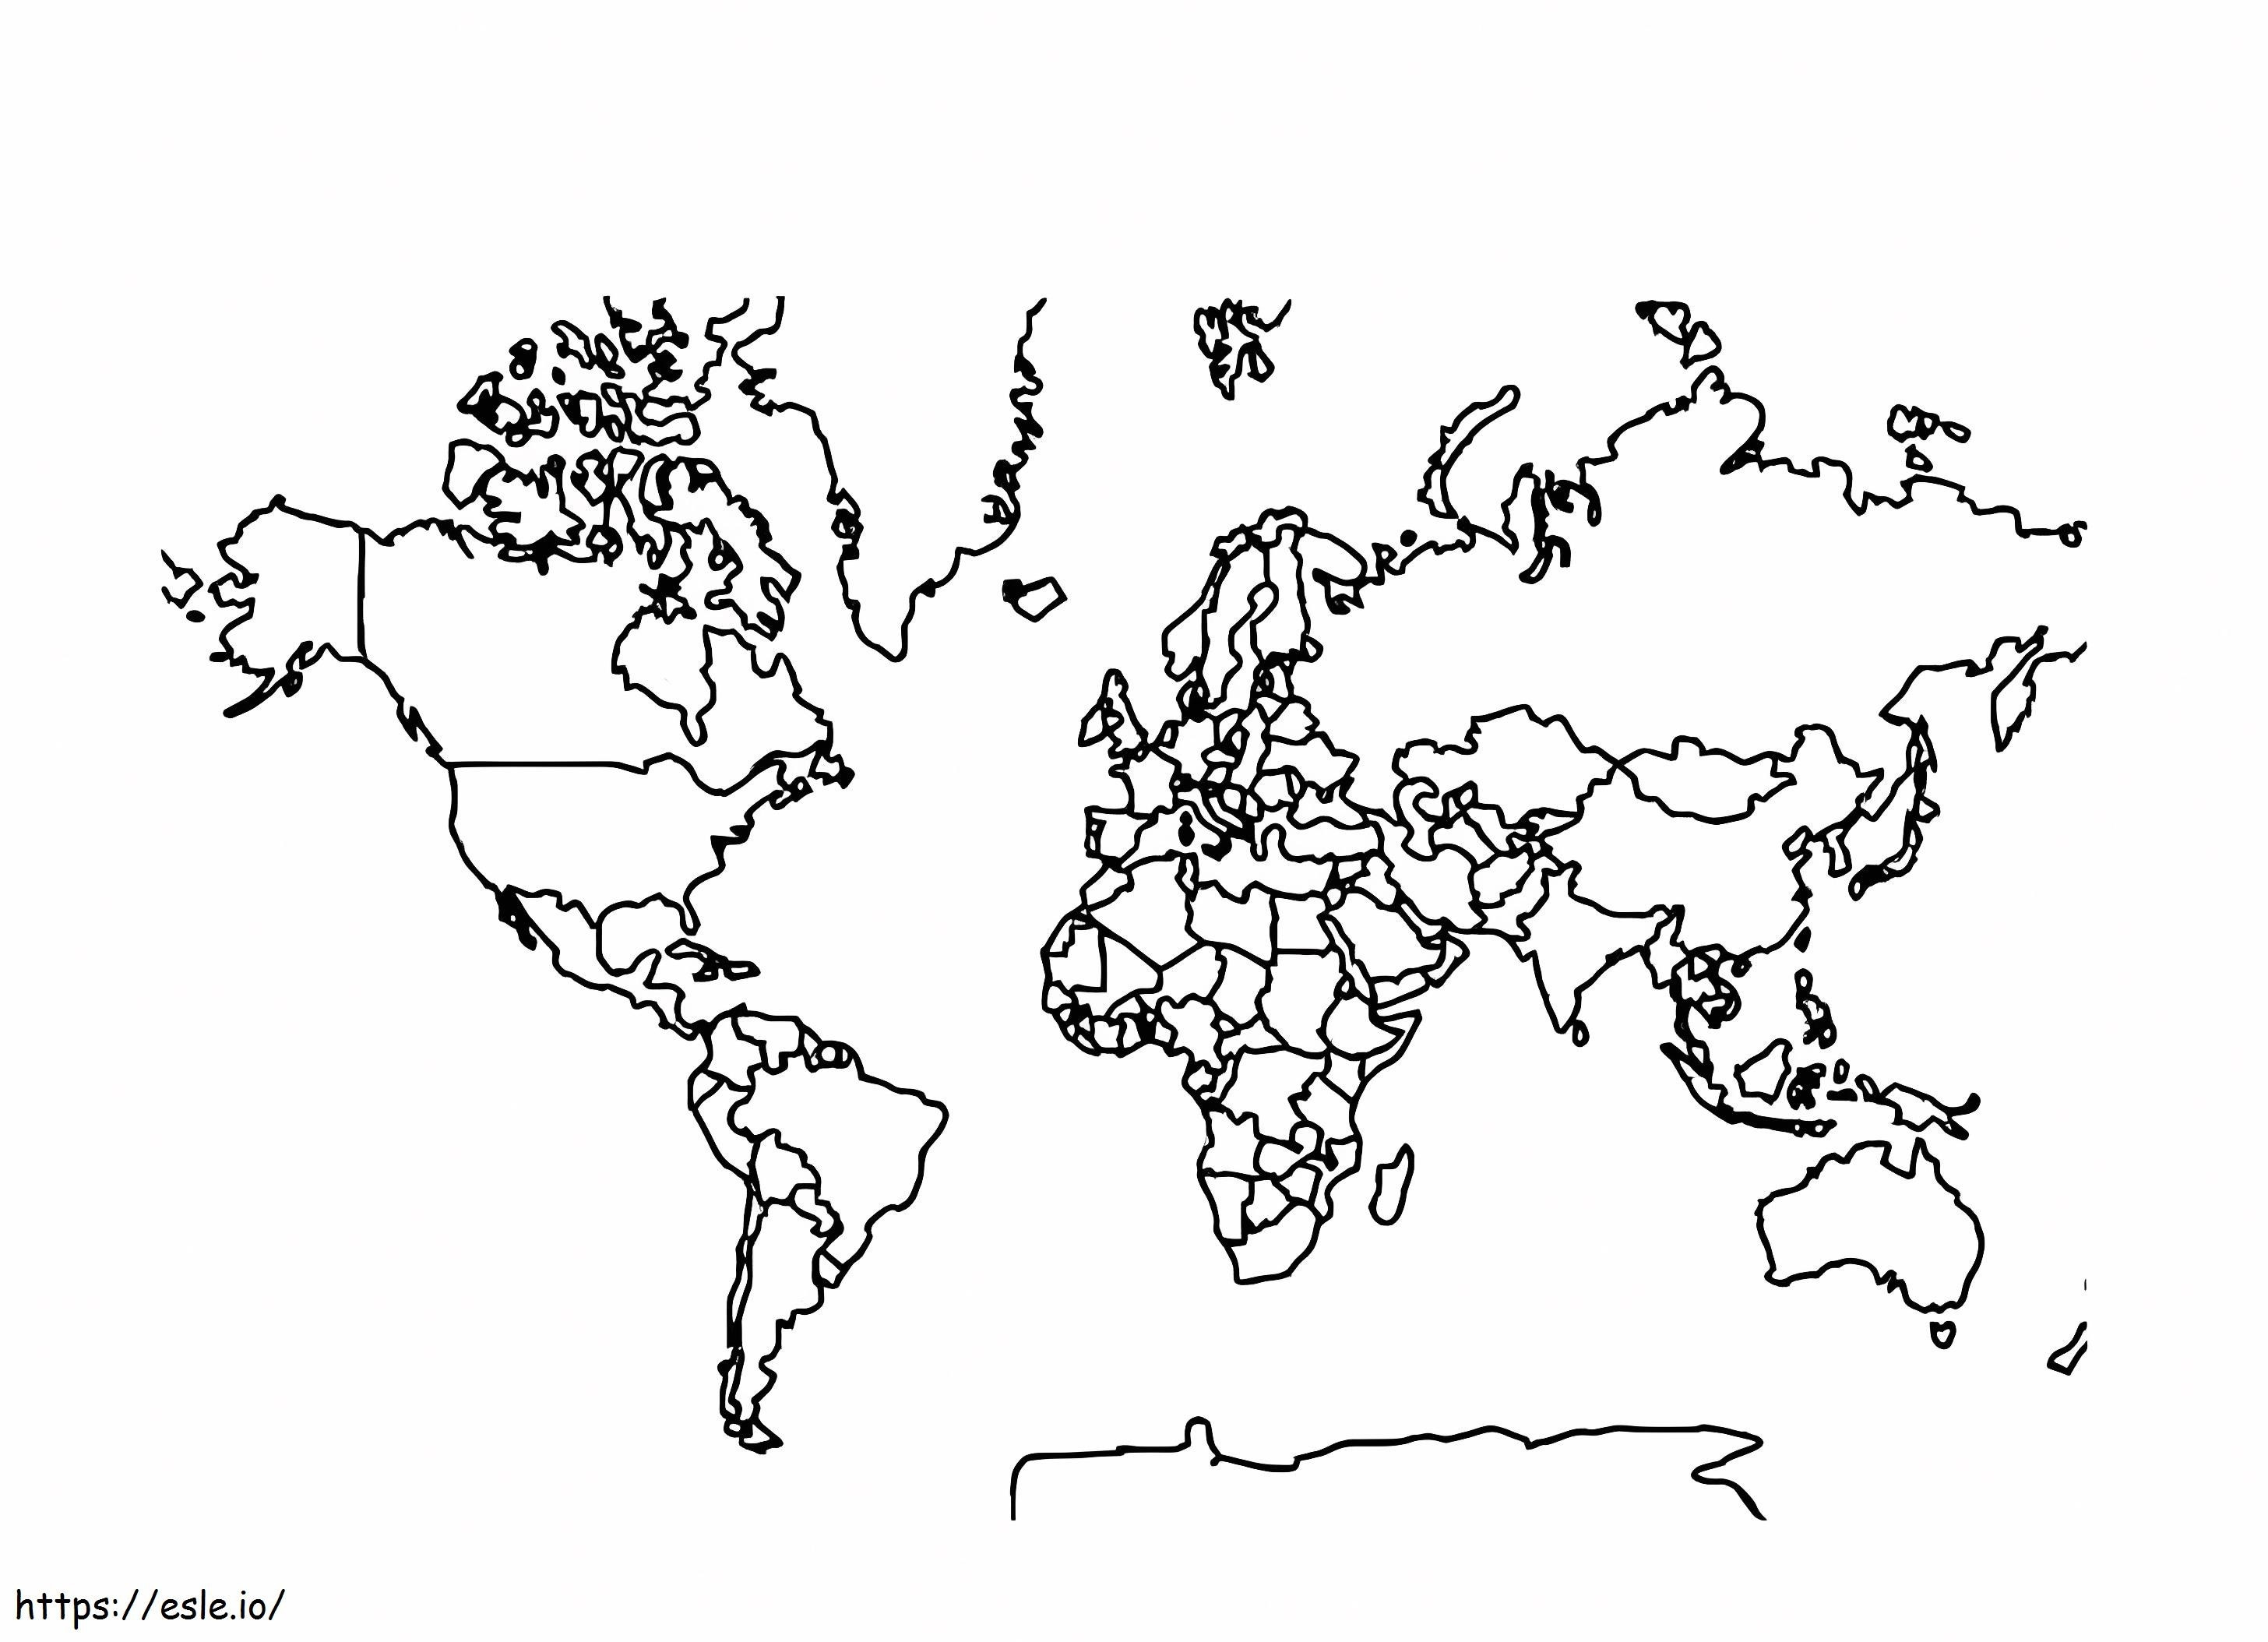 Outline Of The World Map To Color coloring page